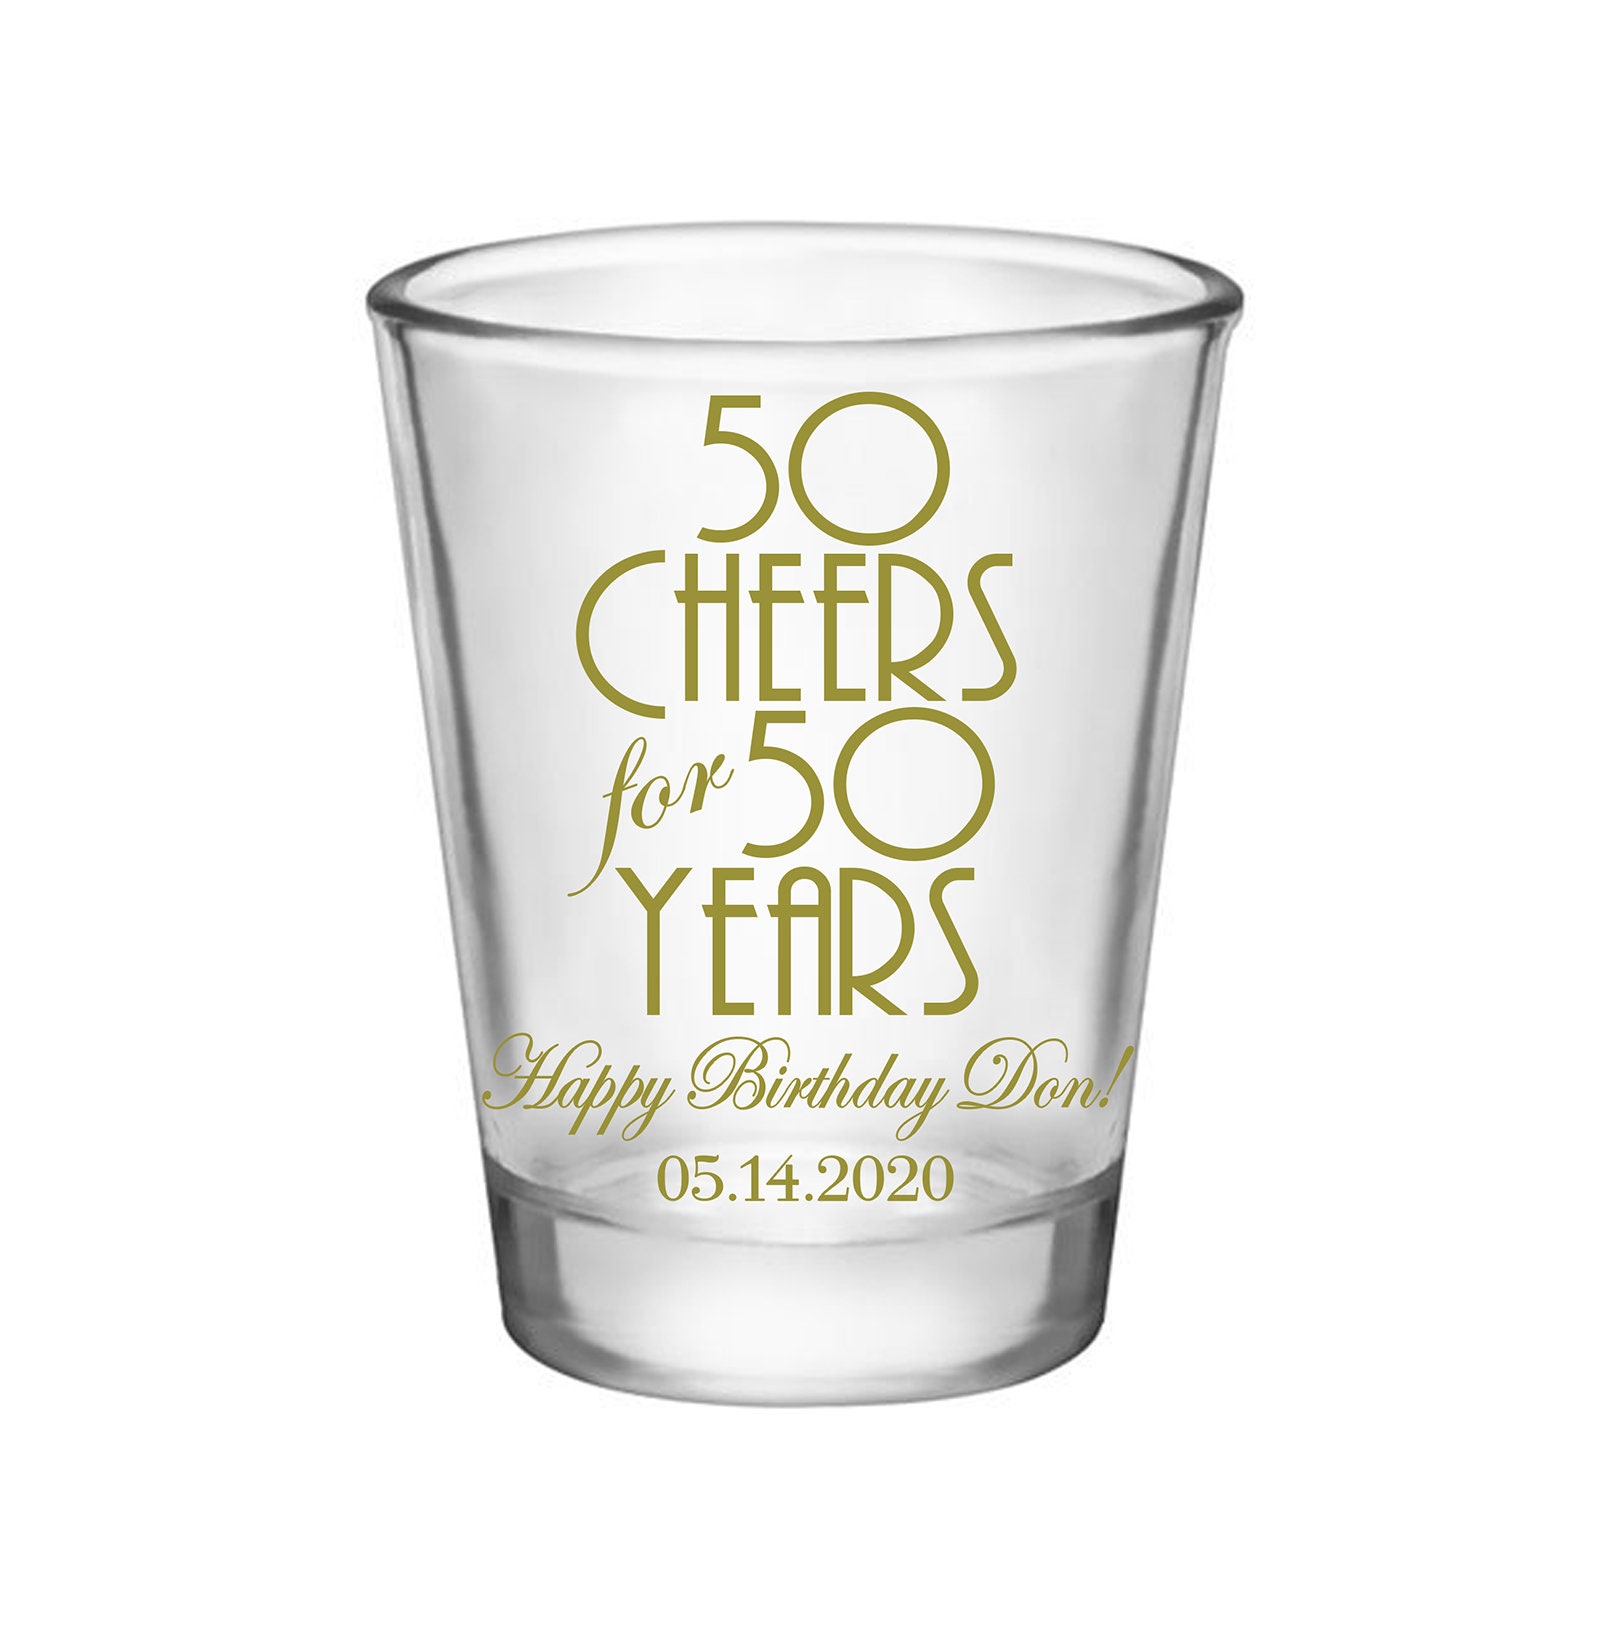 Clear/Frosted Birthday Party Favors Custom Gifts Personalized Shot Glasses | 50 Cheers Years Print Colors Any Age